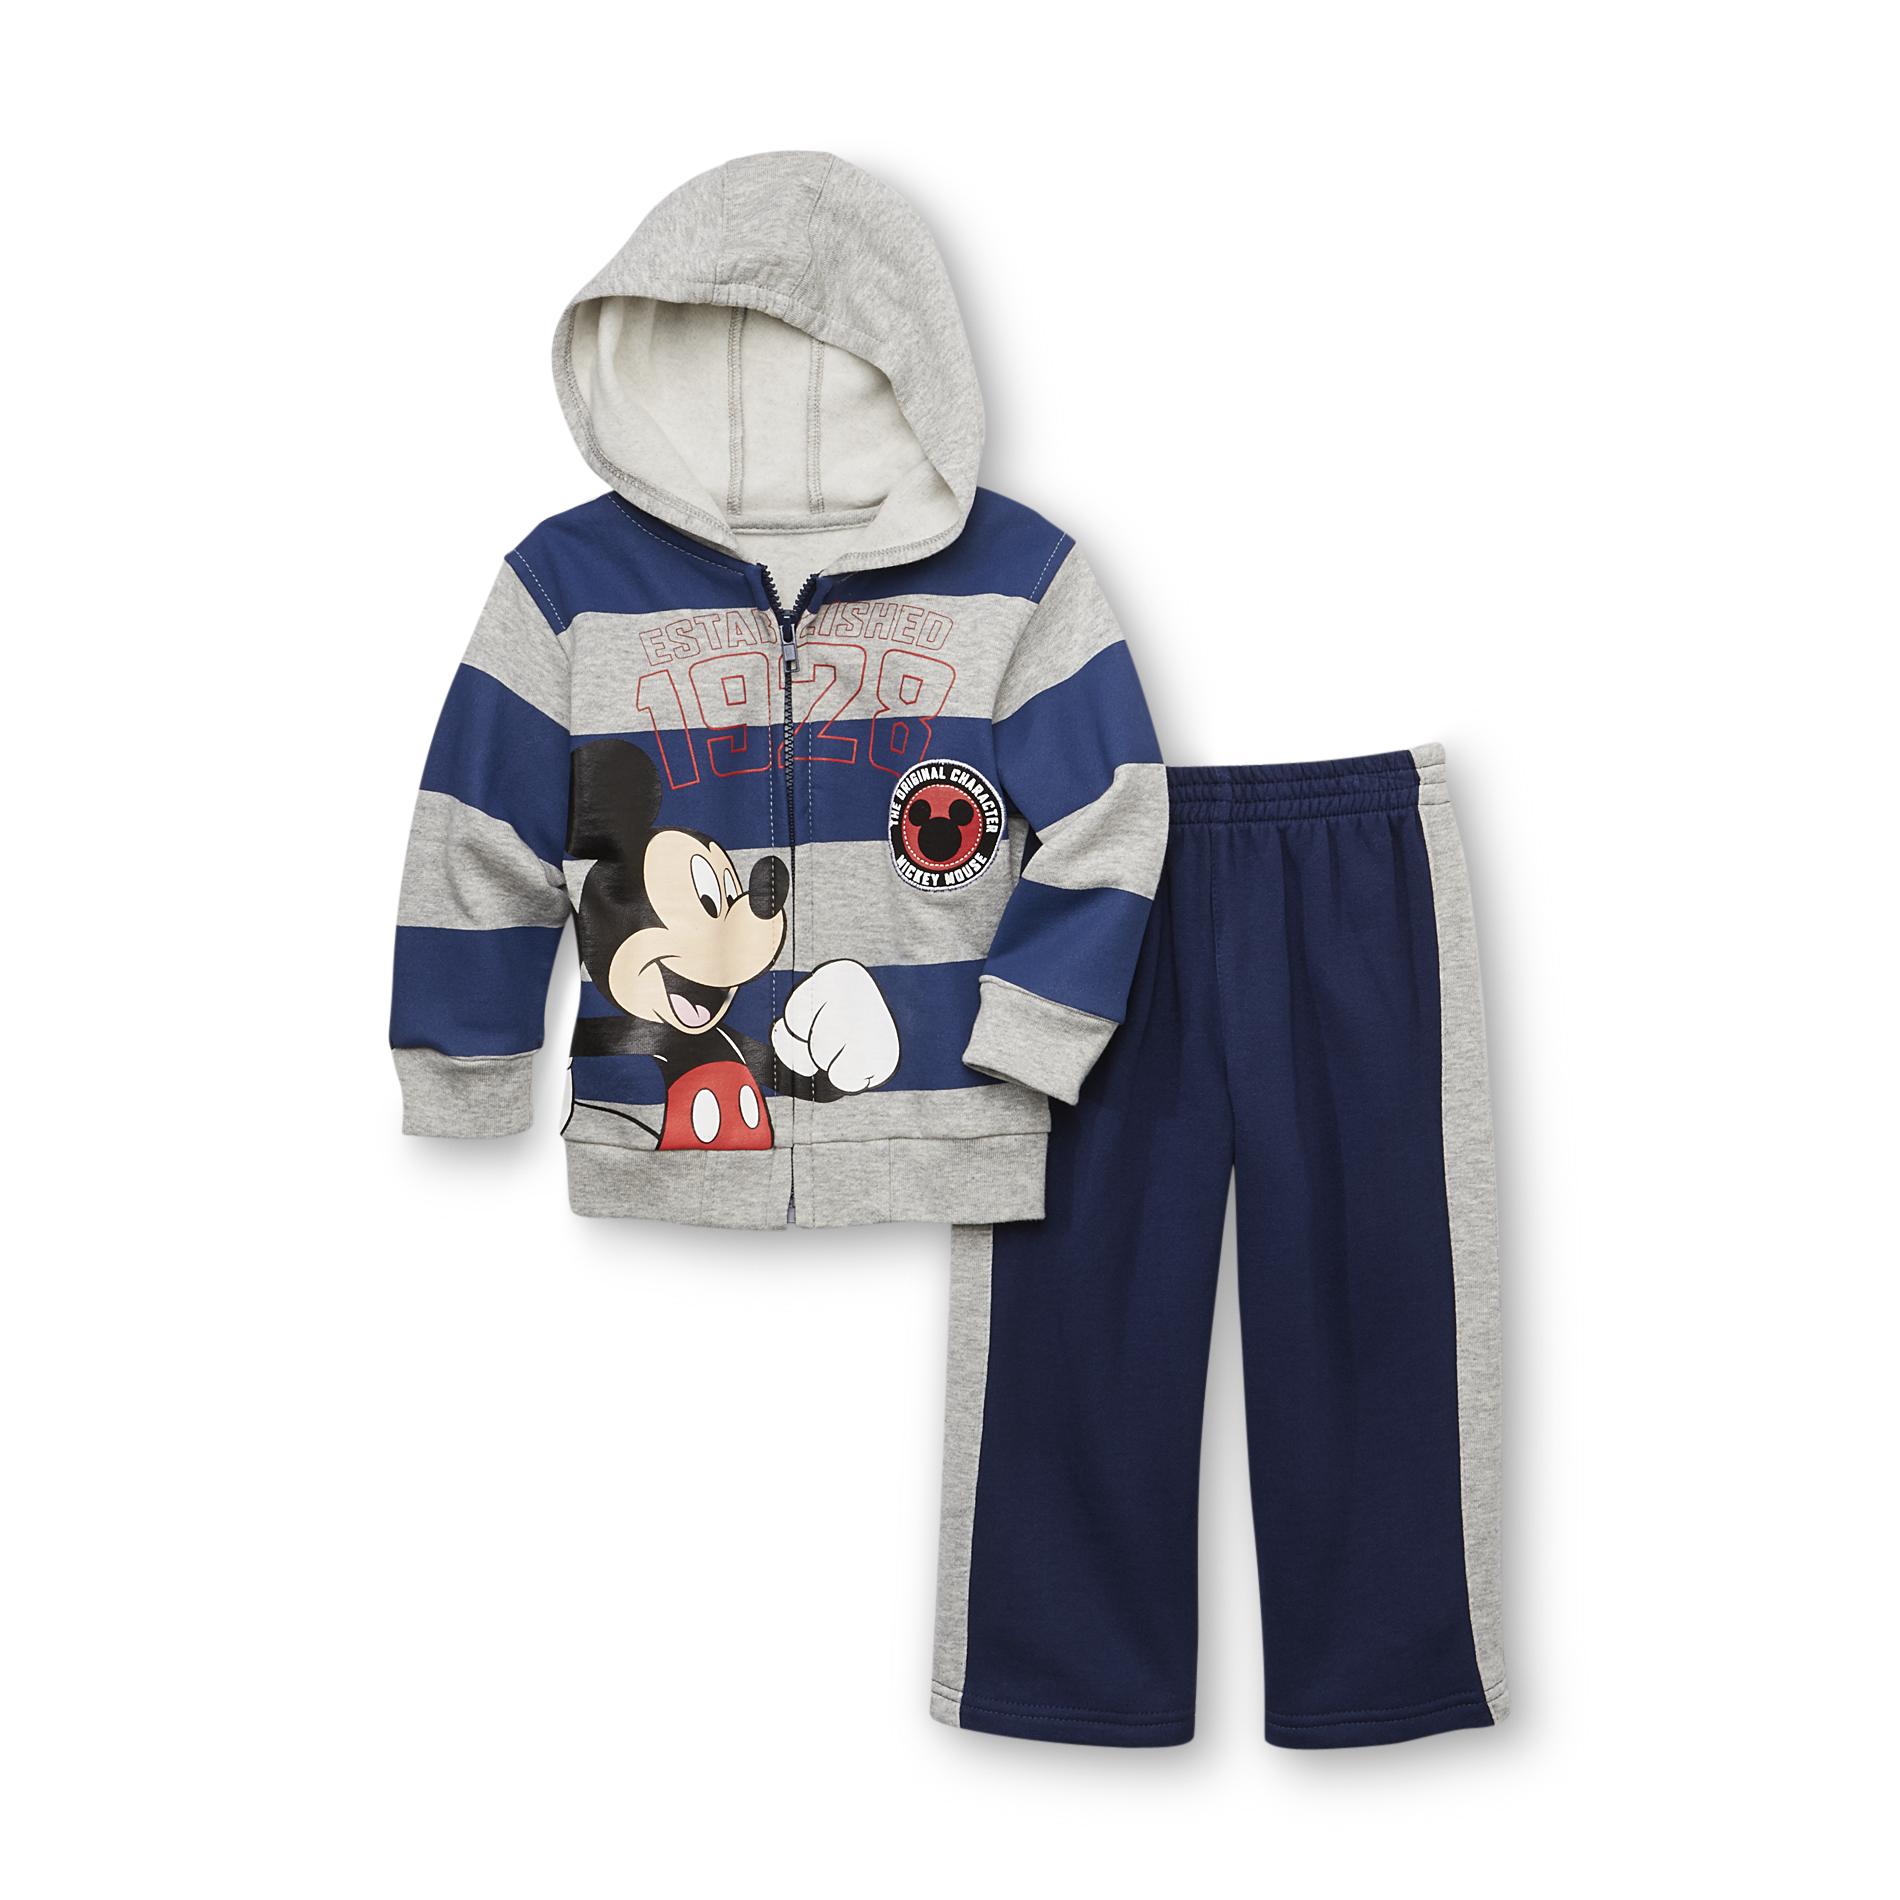 Disney Mickey Mouse Infant & Toddler Boy's Hoodie Jacket & Pants